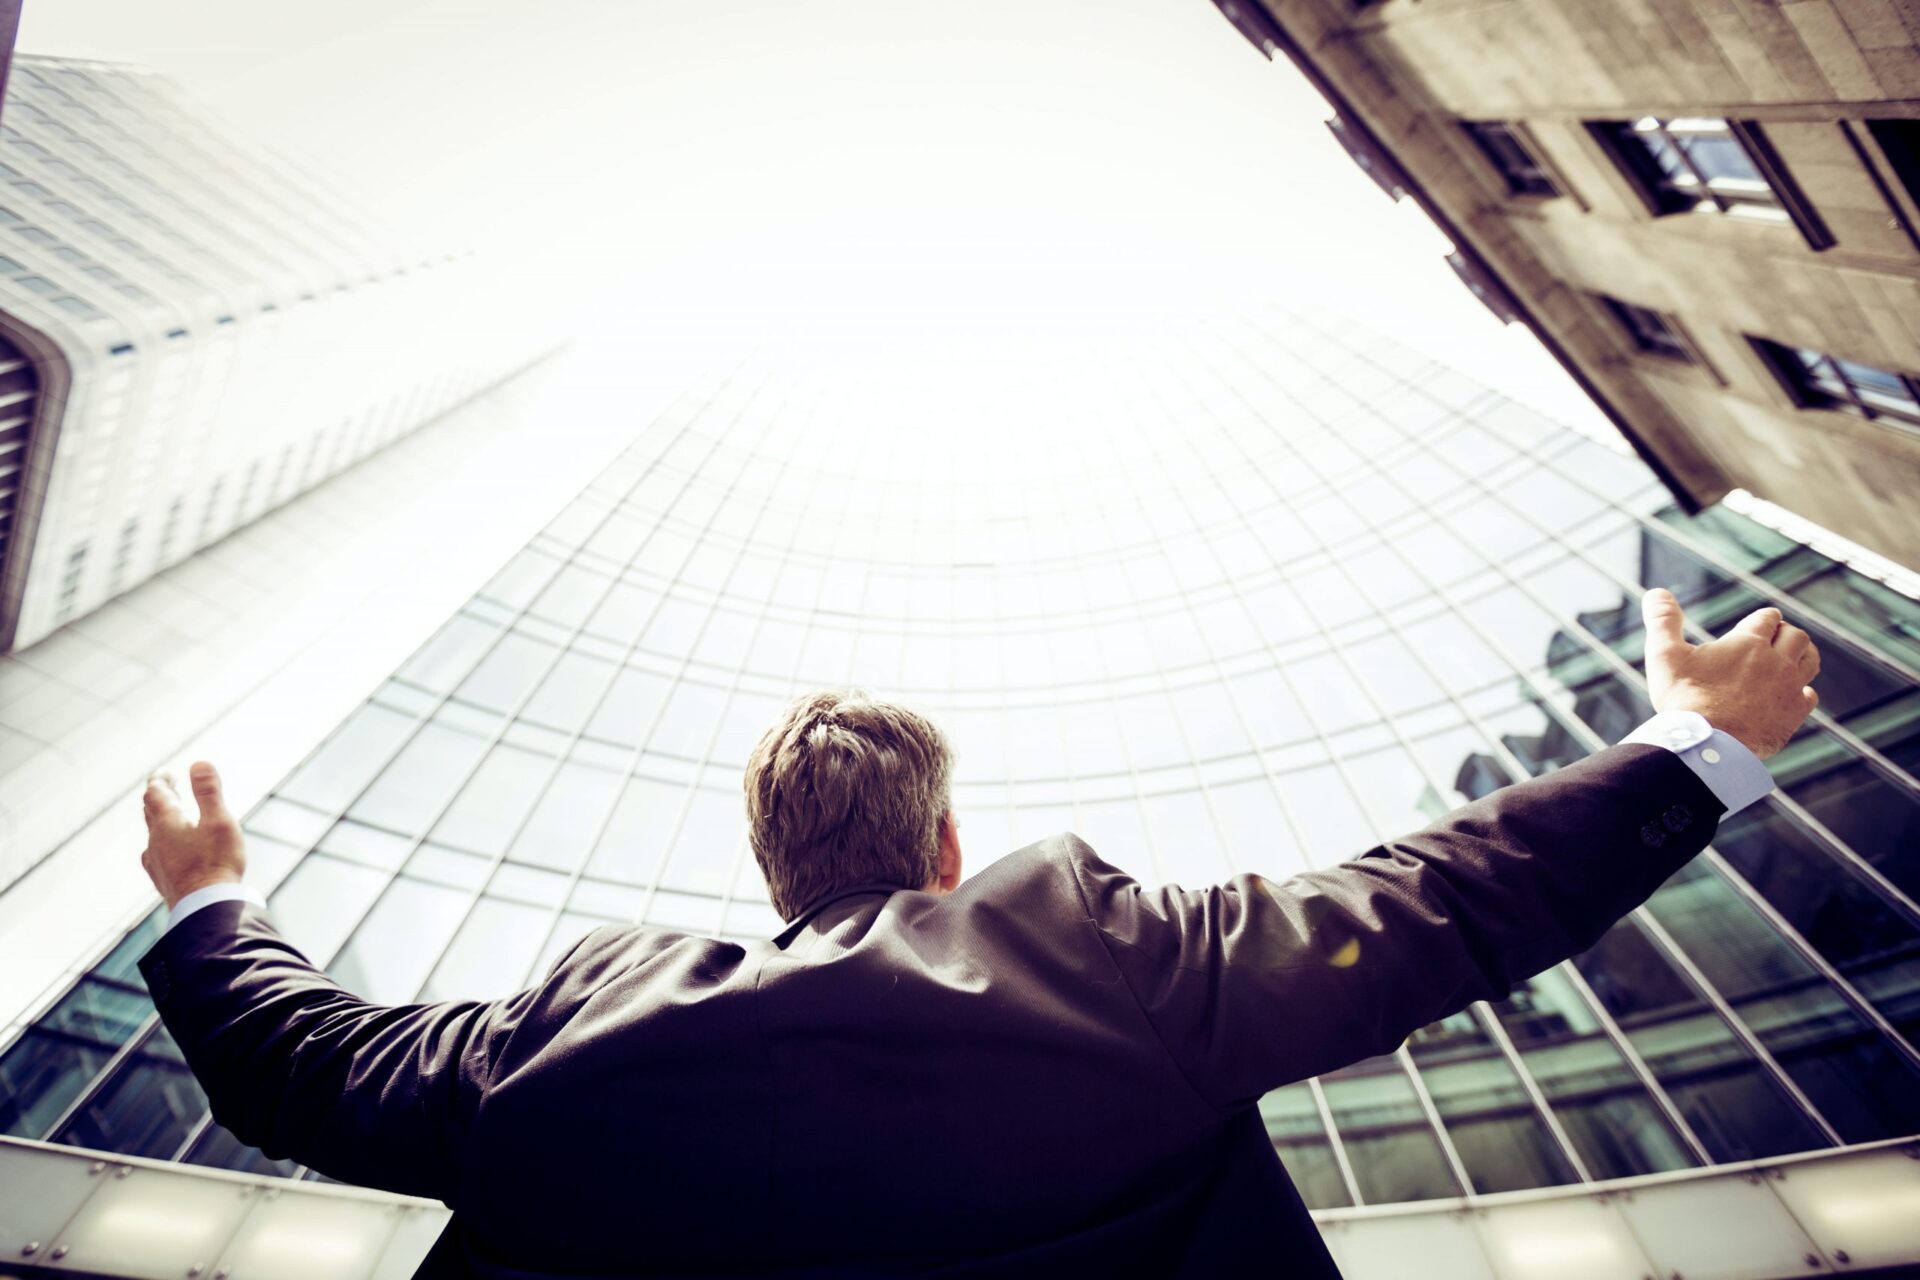 A low-angle photograph of a businessman standing with arms outstretched, looking up towards the sky in a modern cityscape. He is dressed in a suit and appears to be celebrating or feeling triumphant.